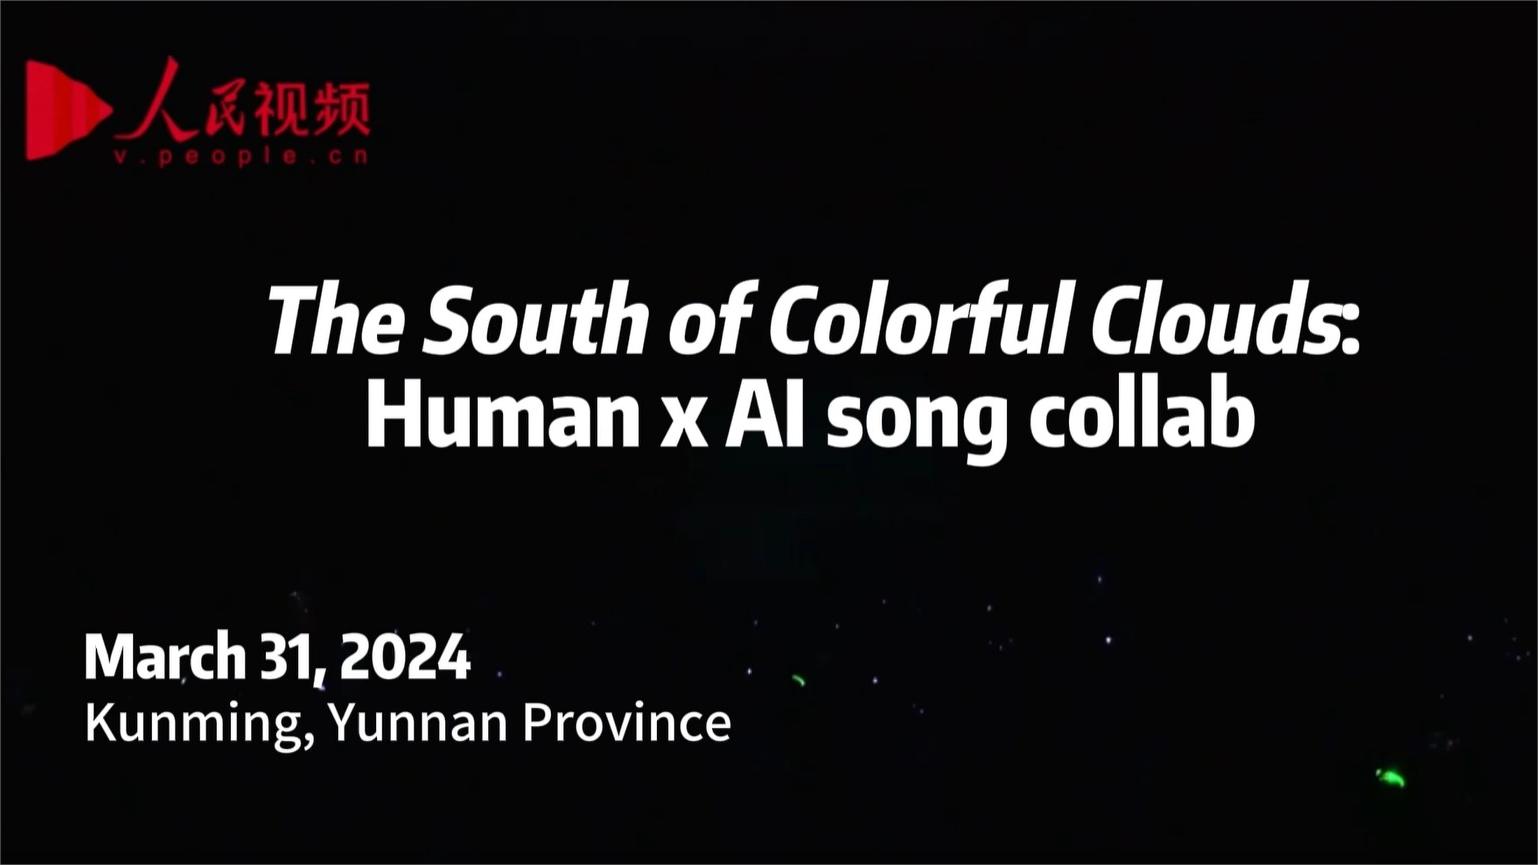 The South of Colorful Clouds: Human x AI song collab